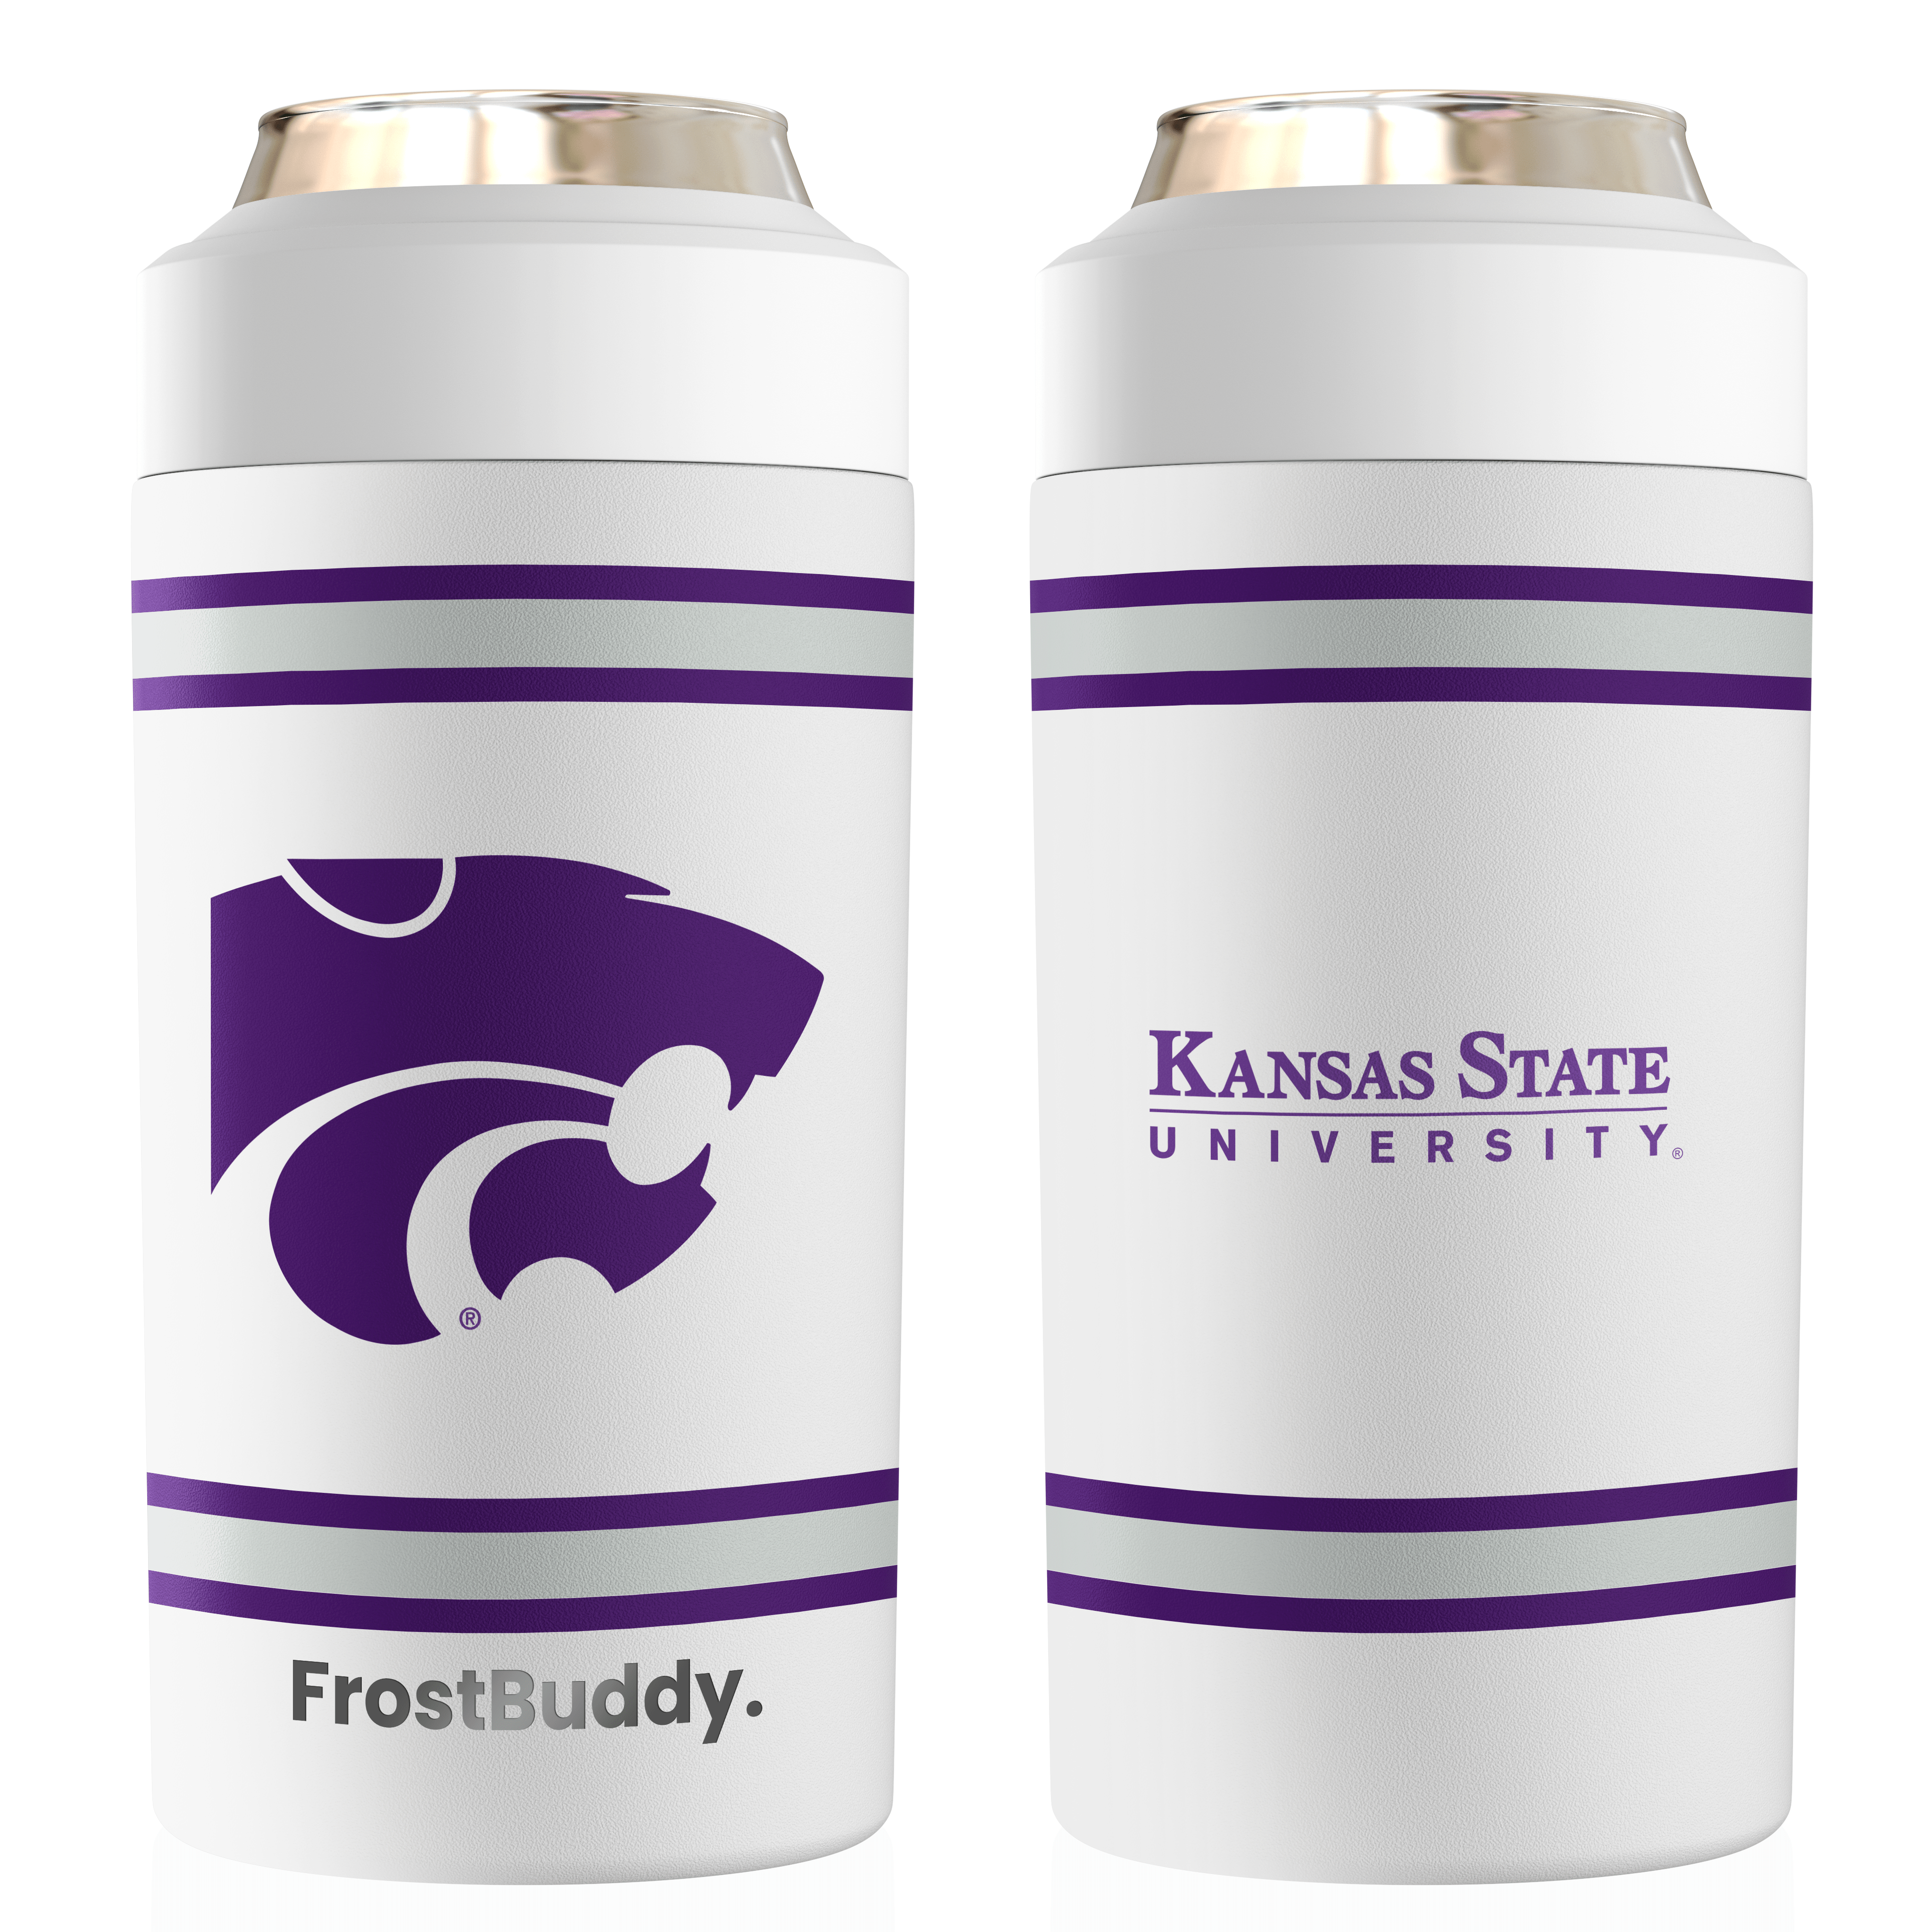 Universal Buddy | Iowa State University - Holds 12oz Cans, Slim Cans, Bottles, 16oz Cans & Bottles - Keep Your Drink Cold for 12+ Hours | Frost Buddy